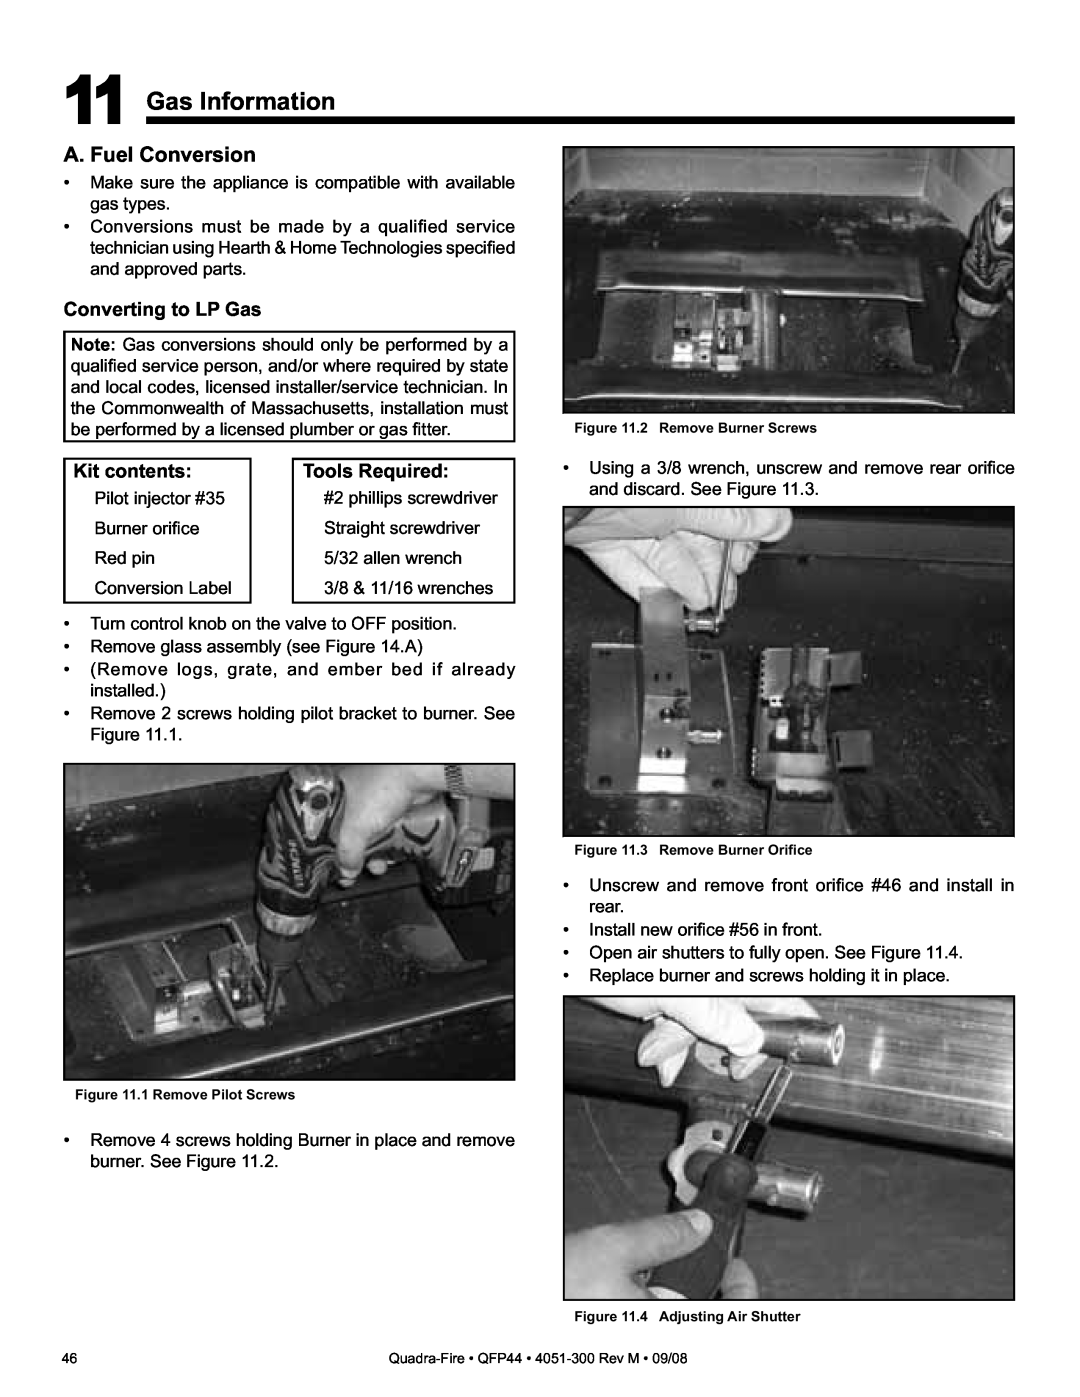 Quadra-Fire QFP44 owner manual Gas Information, A. Fuel Conversion, Converting to LP Gas, Kit contents, Tools Required 